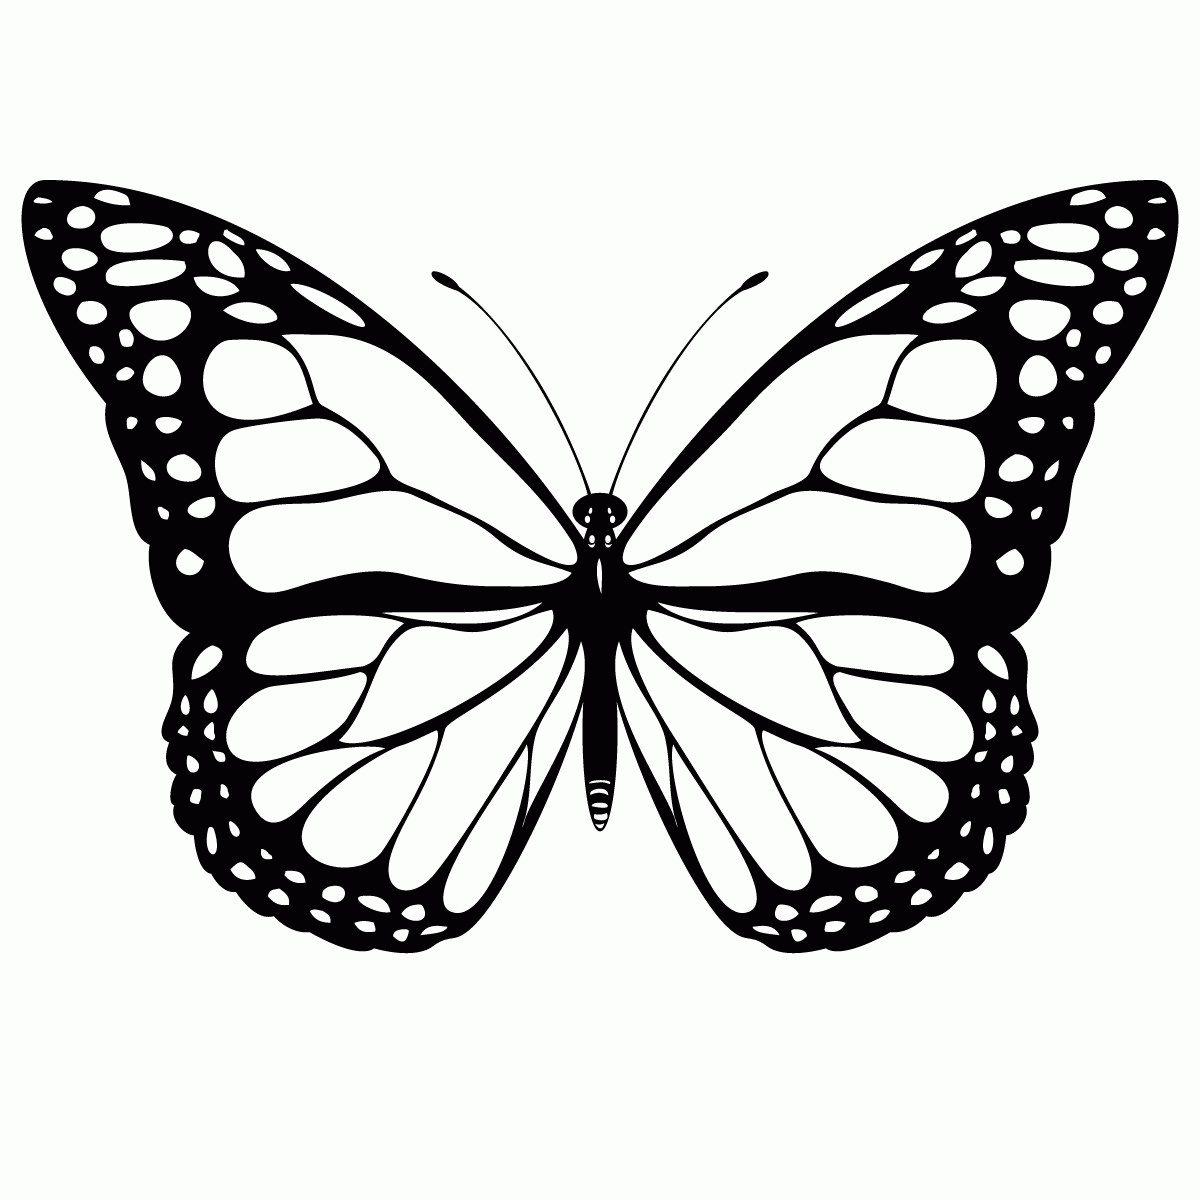 Butterfly Coloring Pages Printable | lugudvrlistscom